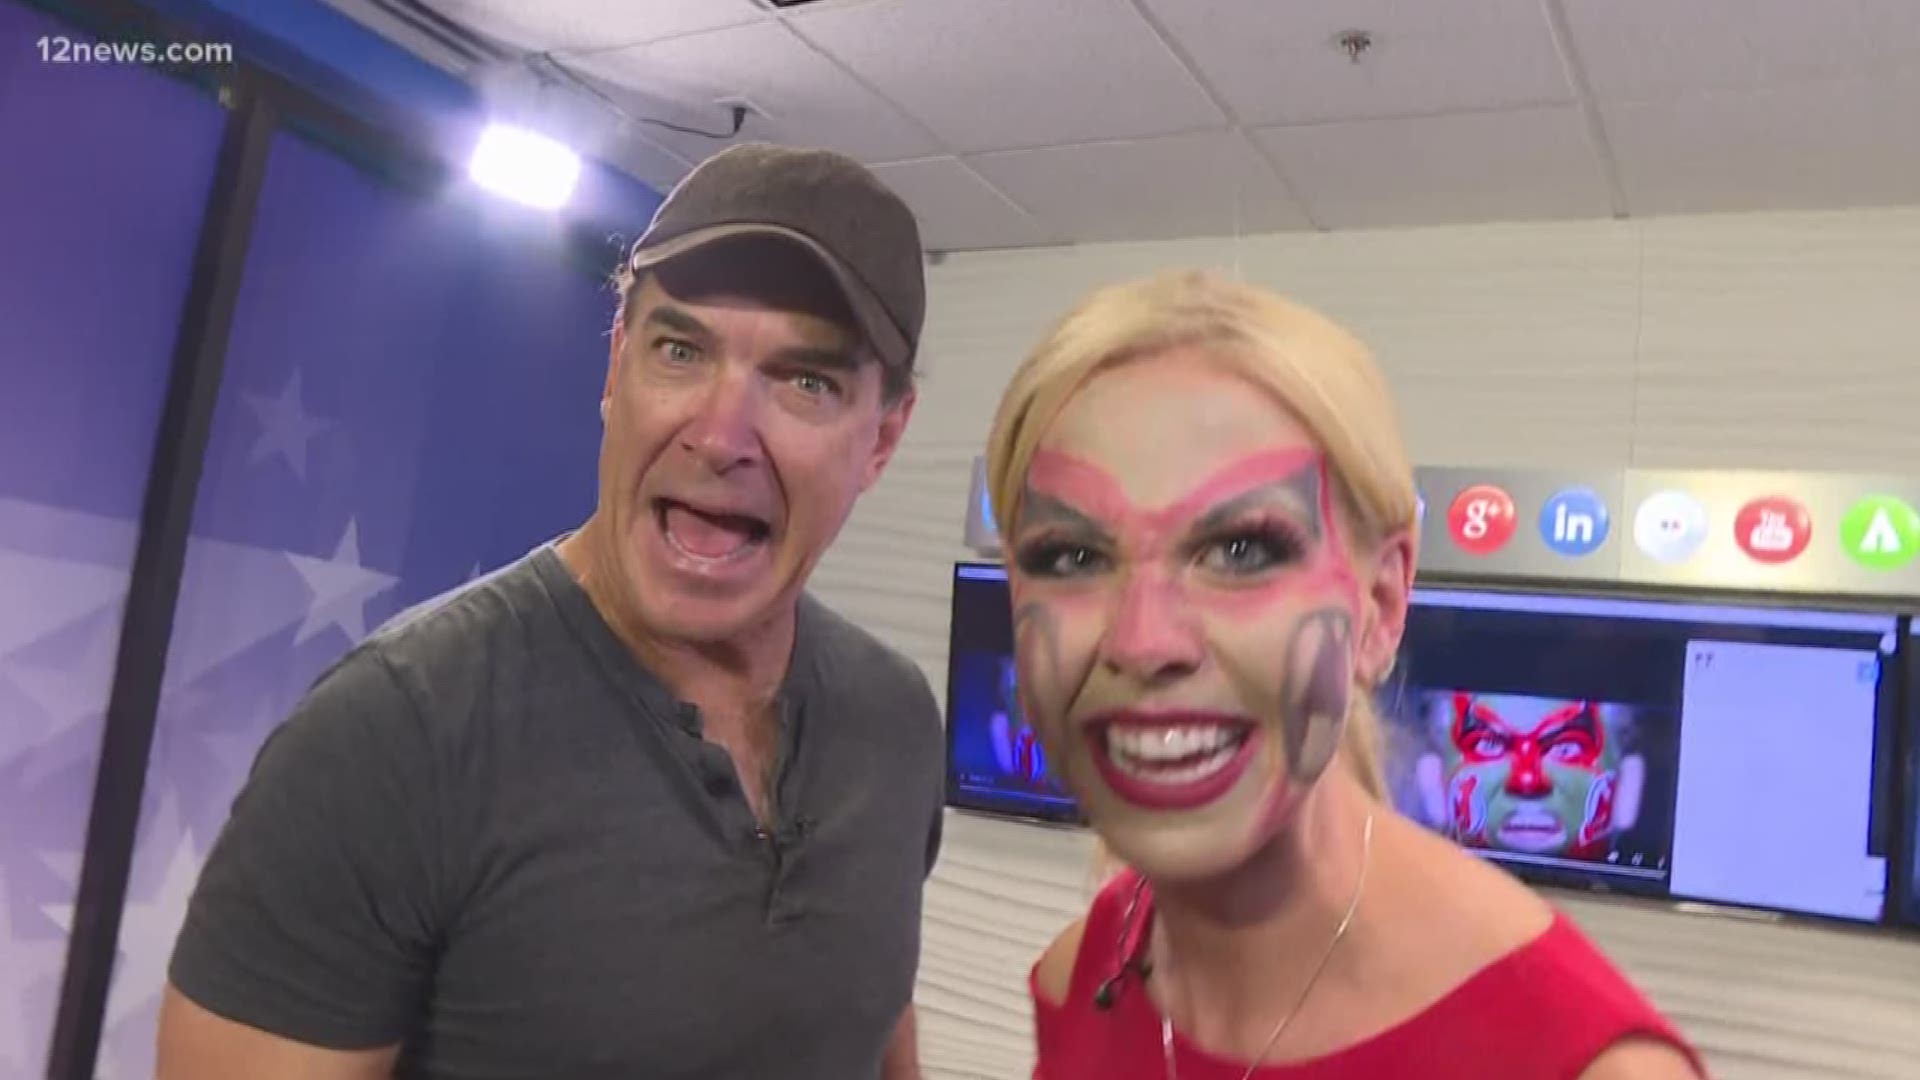 Actor Patrick Warburton may be best known for his role as Puddy in the NBC hit "Seinfeld", but this weekend he is playing a few shows in the Valley at Tempe Improv. Warburton stopped by 12 News and gave our own Krystle Henderson a bit of a makeover.